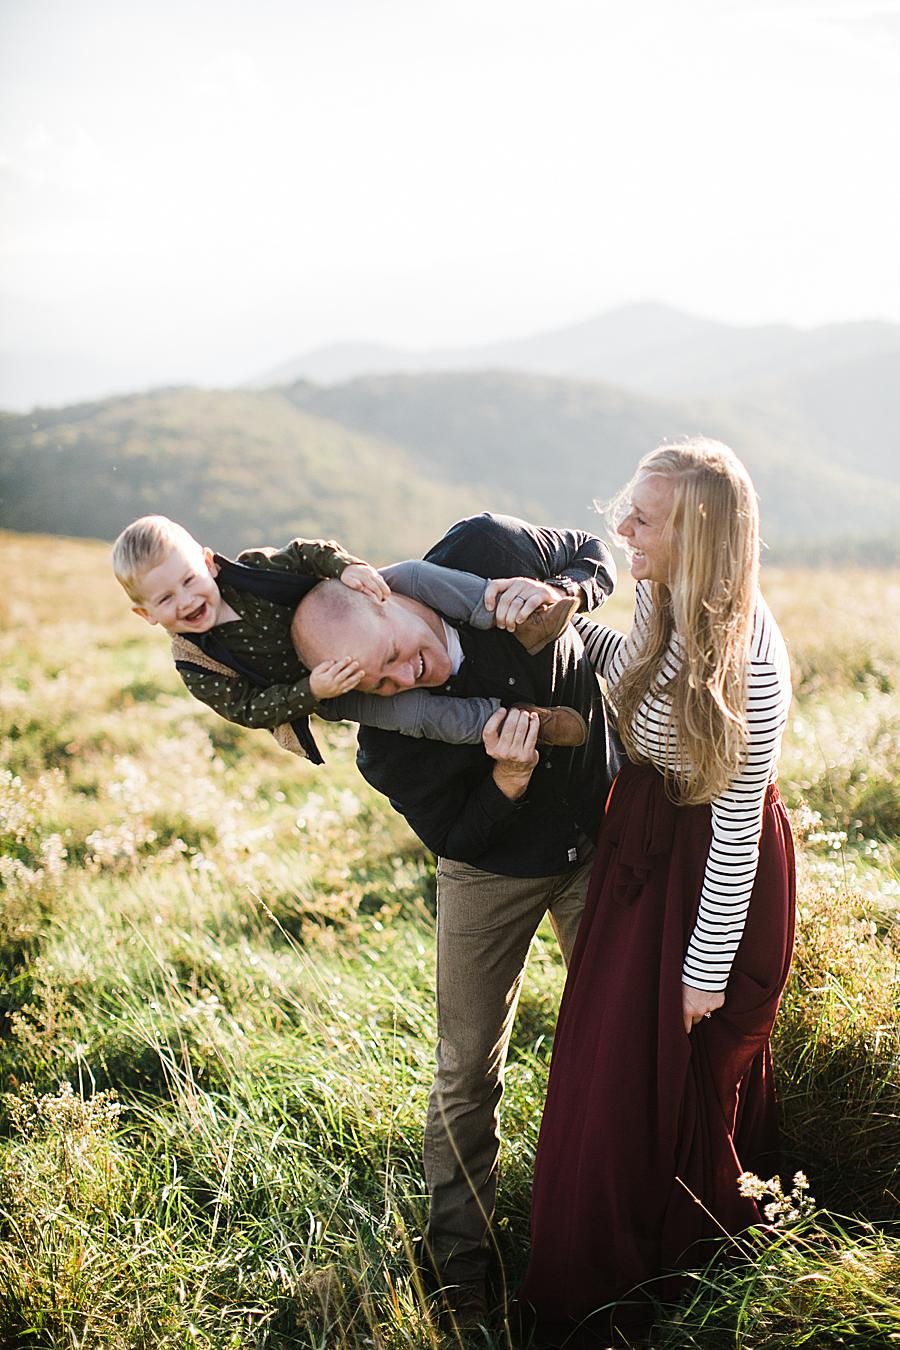 on dad's shoulders at this Family by Knoxville Wedding Photographer, Amanda May Photos.